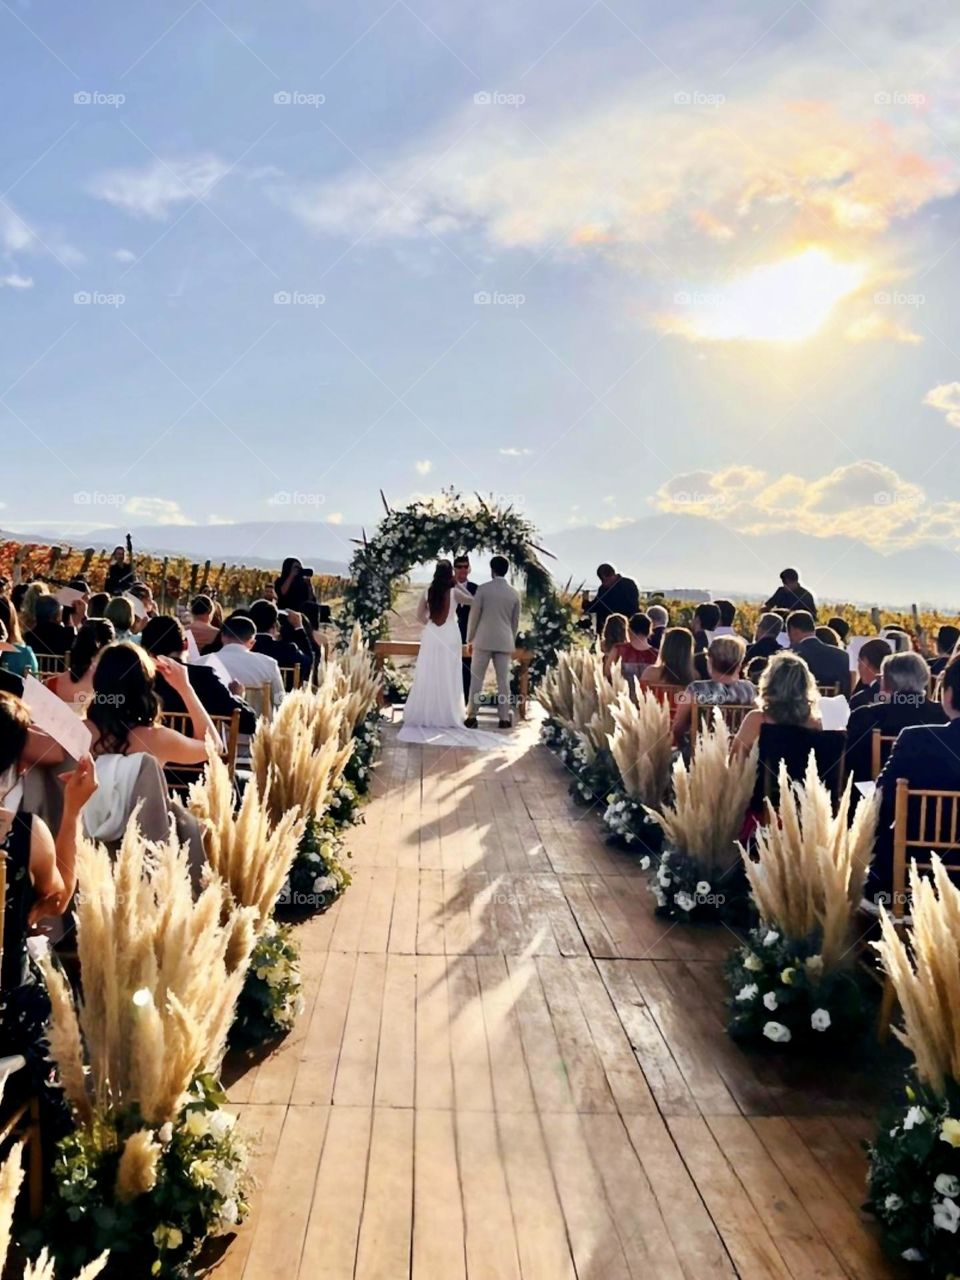 Wedding at an outdoor winery